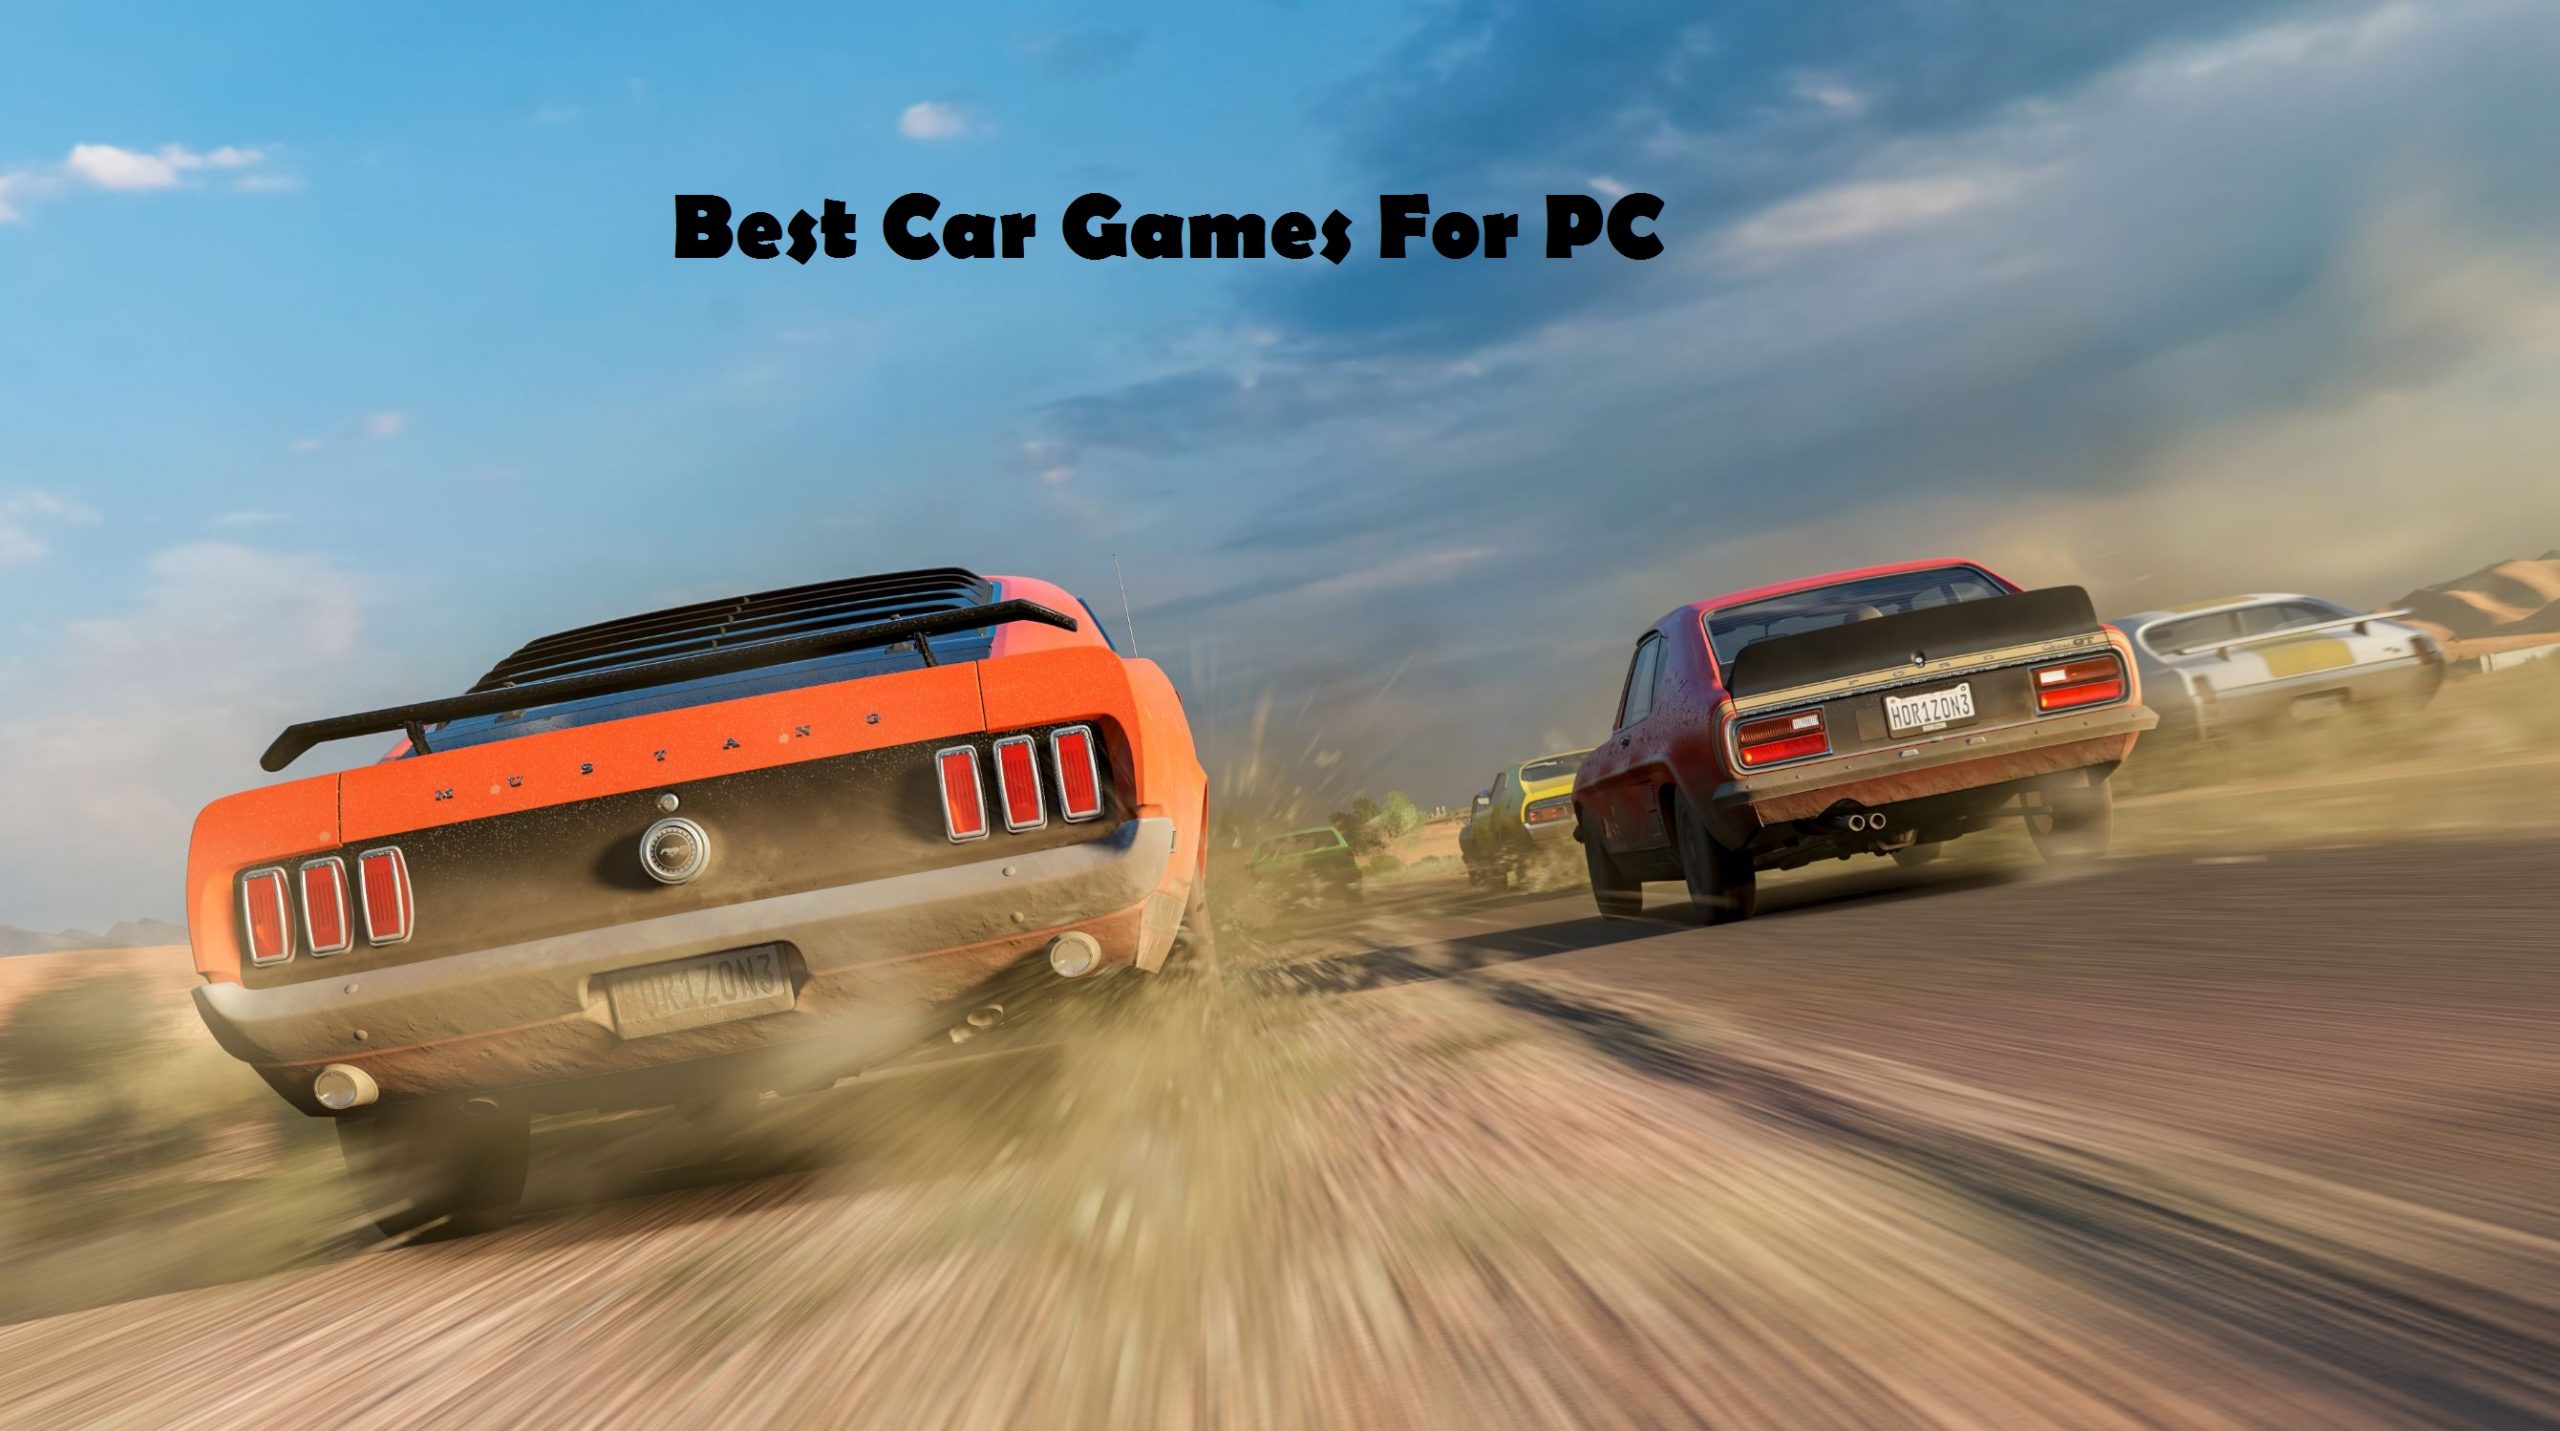 Best Car Games For PC